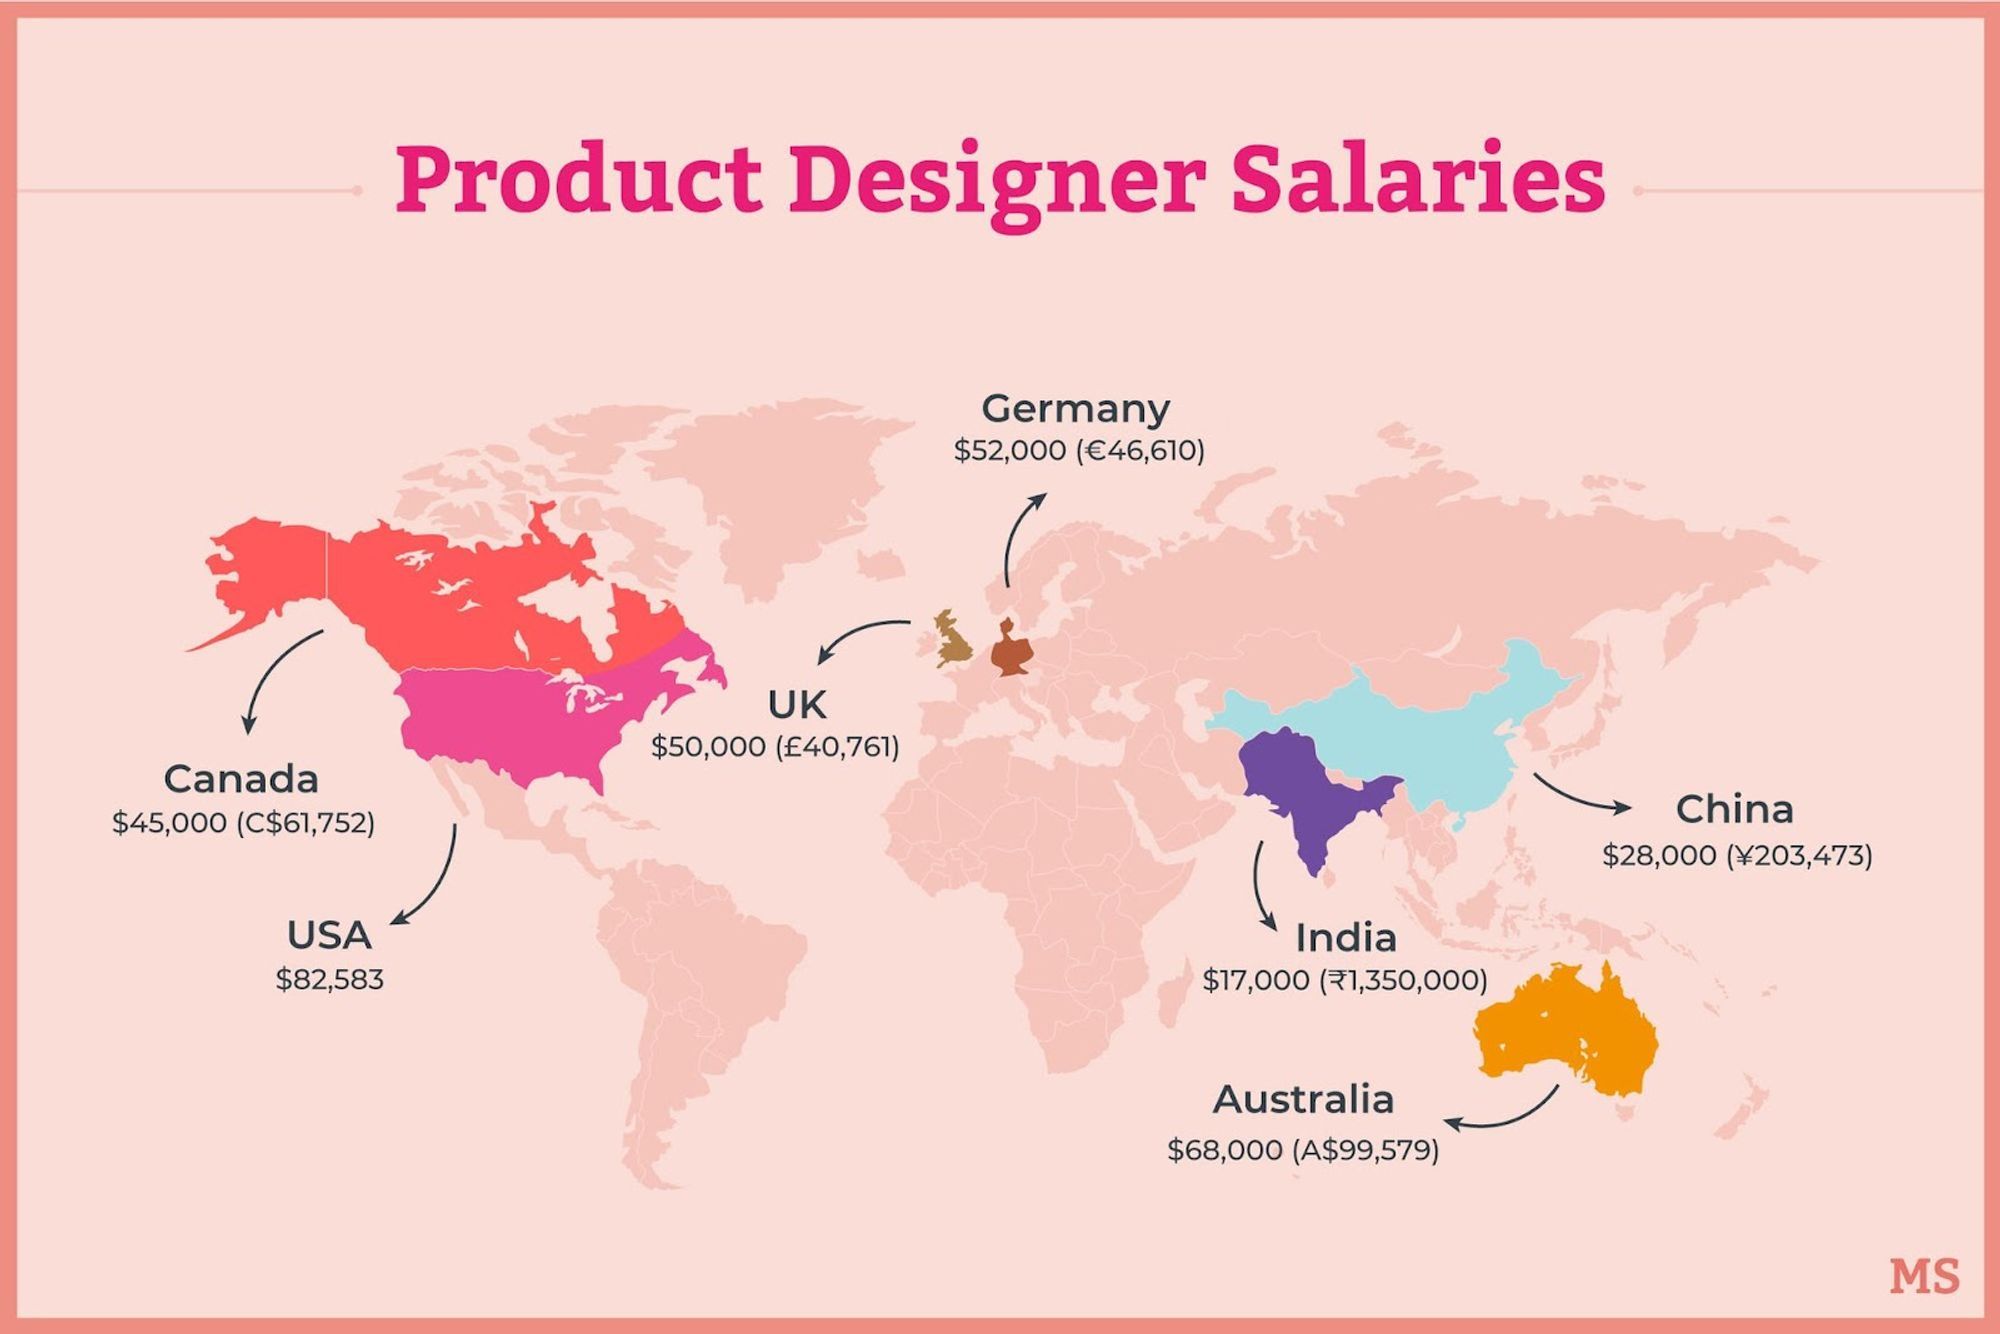 The different average salaries of product designers around the world